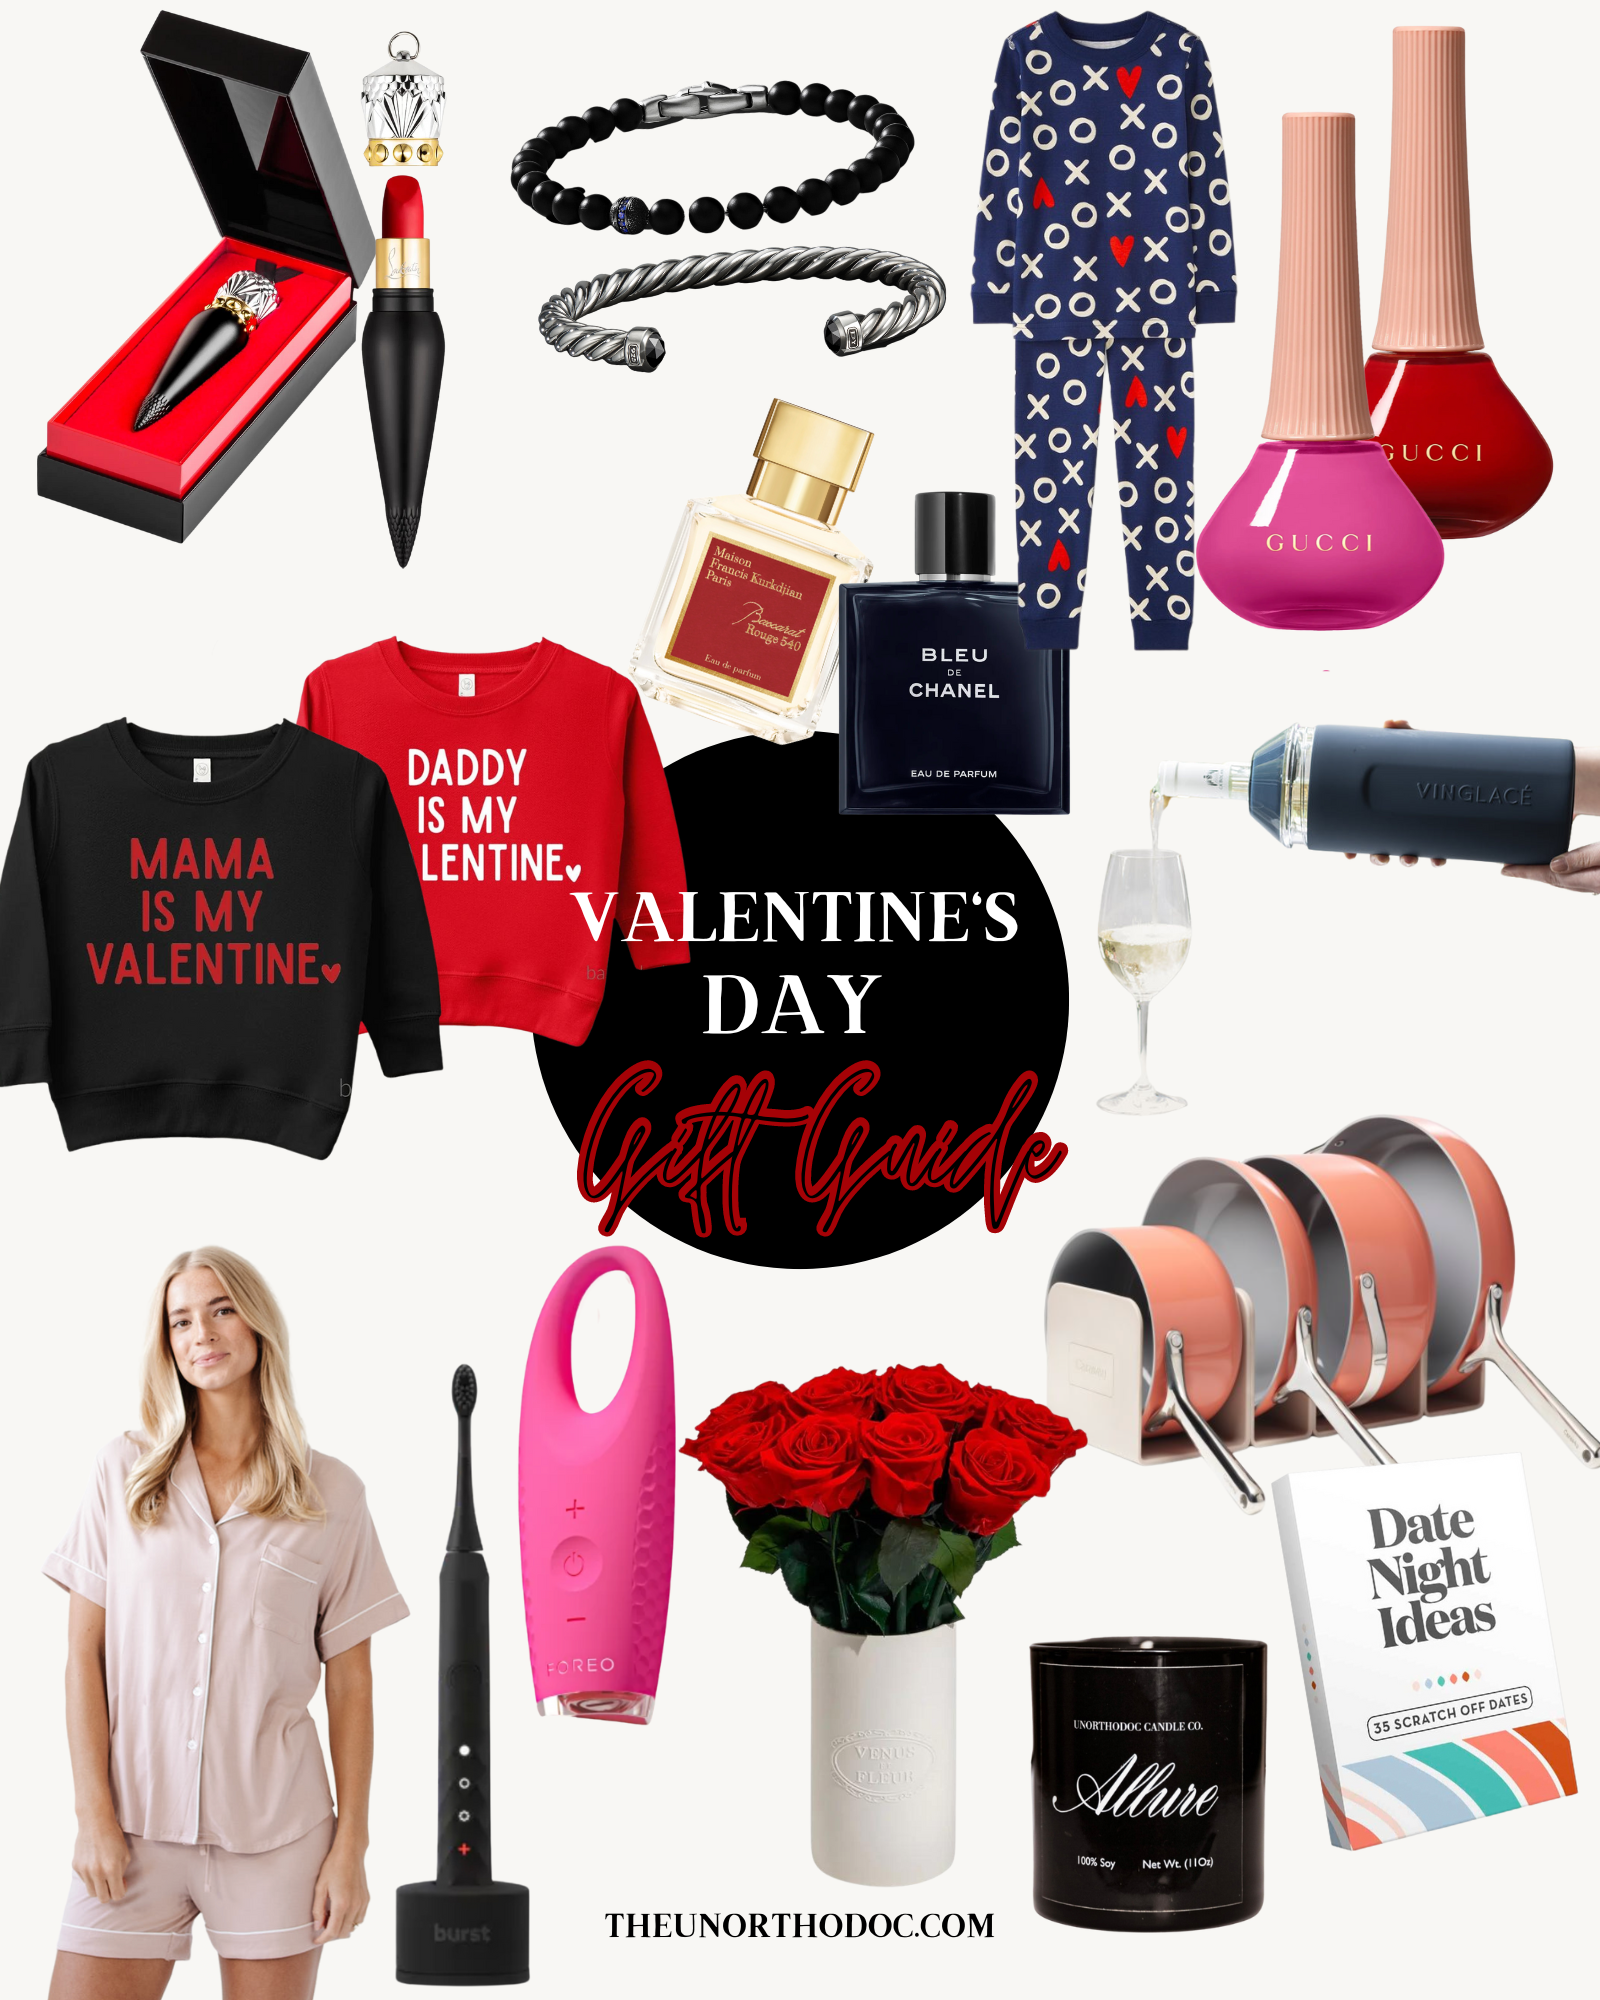 Valentine's Day Gift Ideas for Him & Her